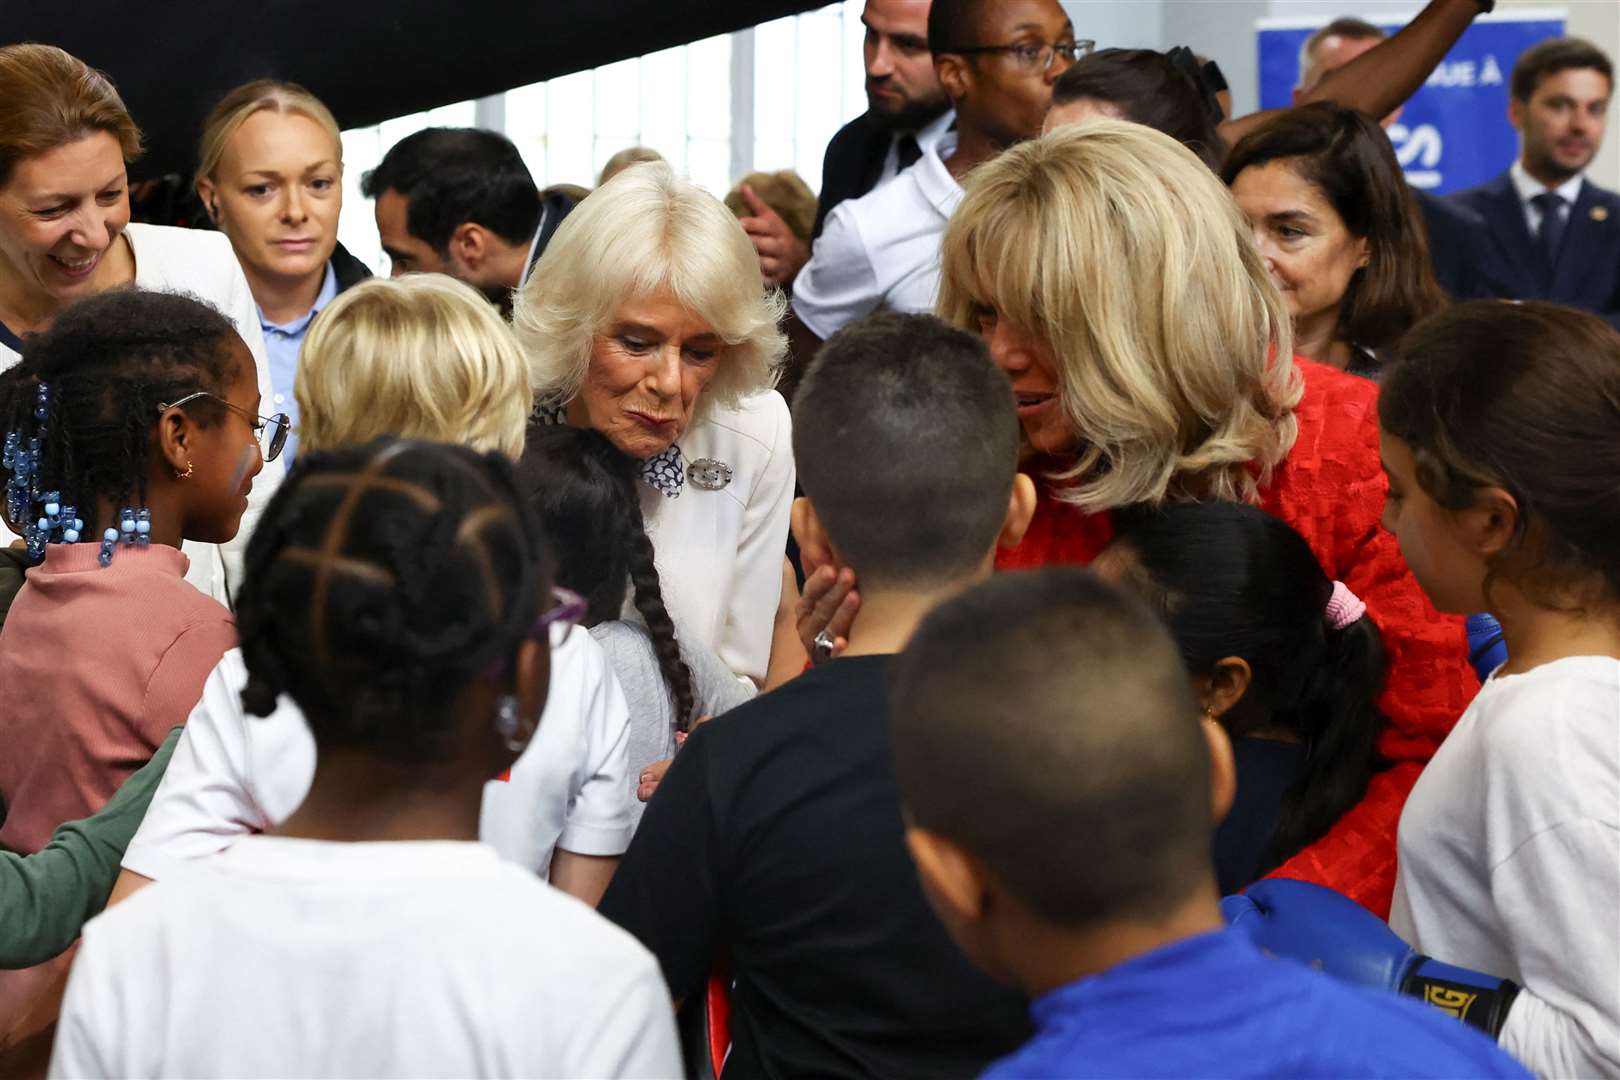 The Queen and Brigitte Macron meet young athletes in Saint-Denis (Hannah McKay/PA)